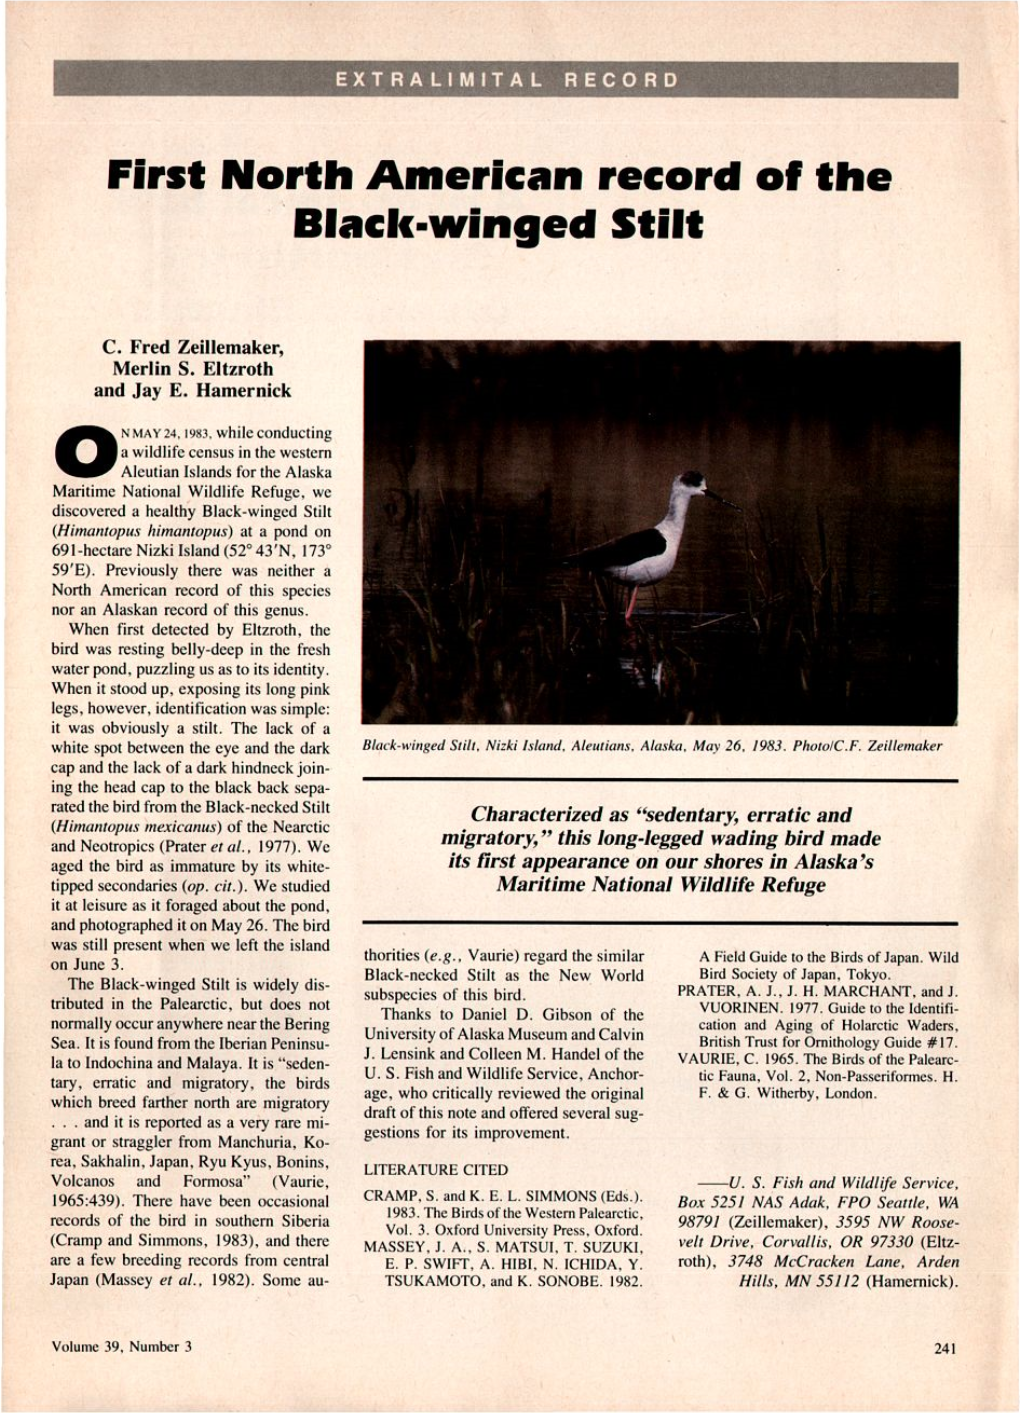 First North American Record of the Black-Winged Stilt